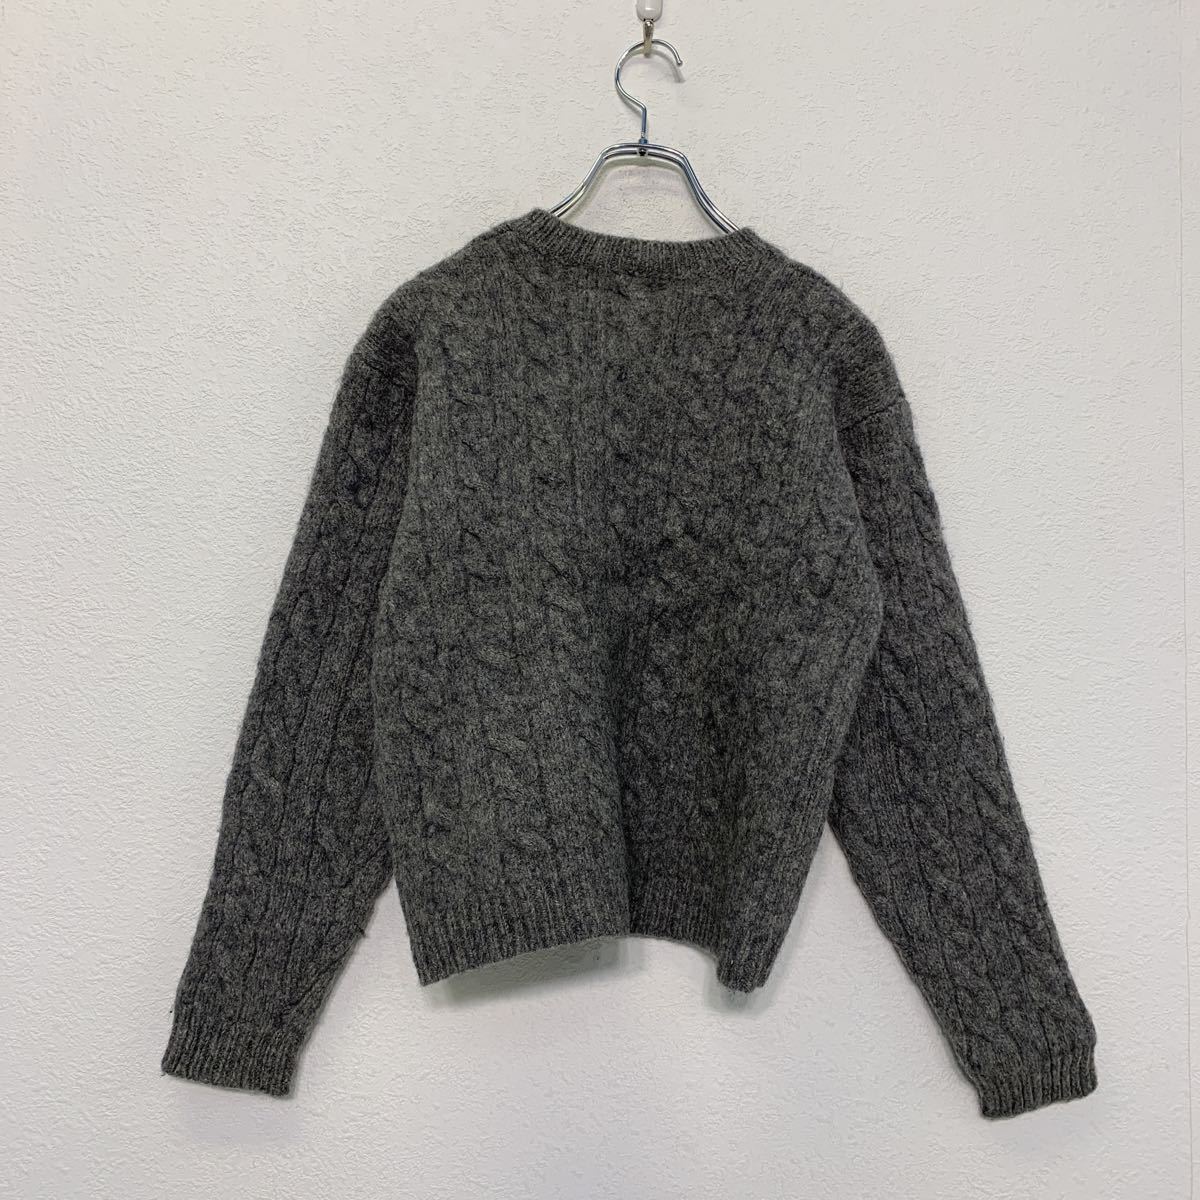 GAP knitted sweater M gray Gap wool old clothes . America buying up a510-5700